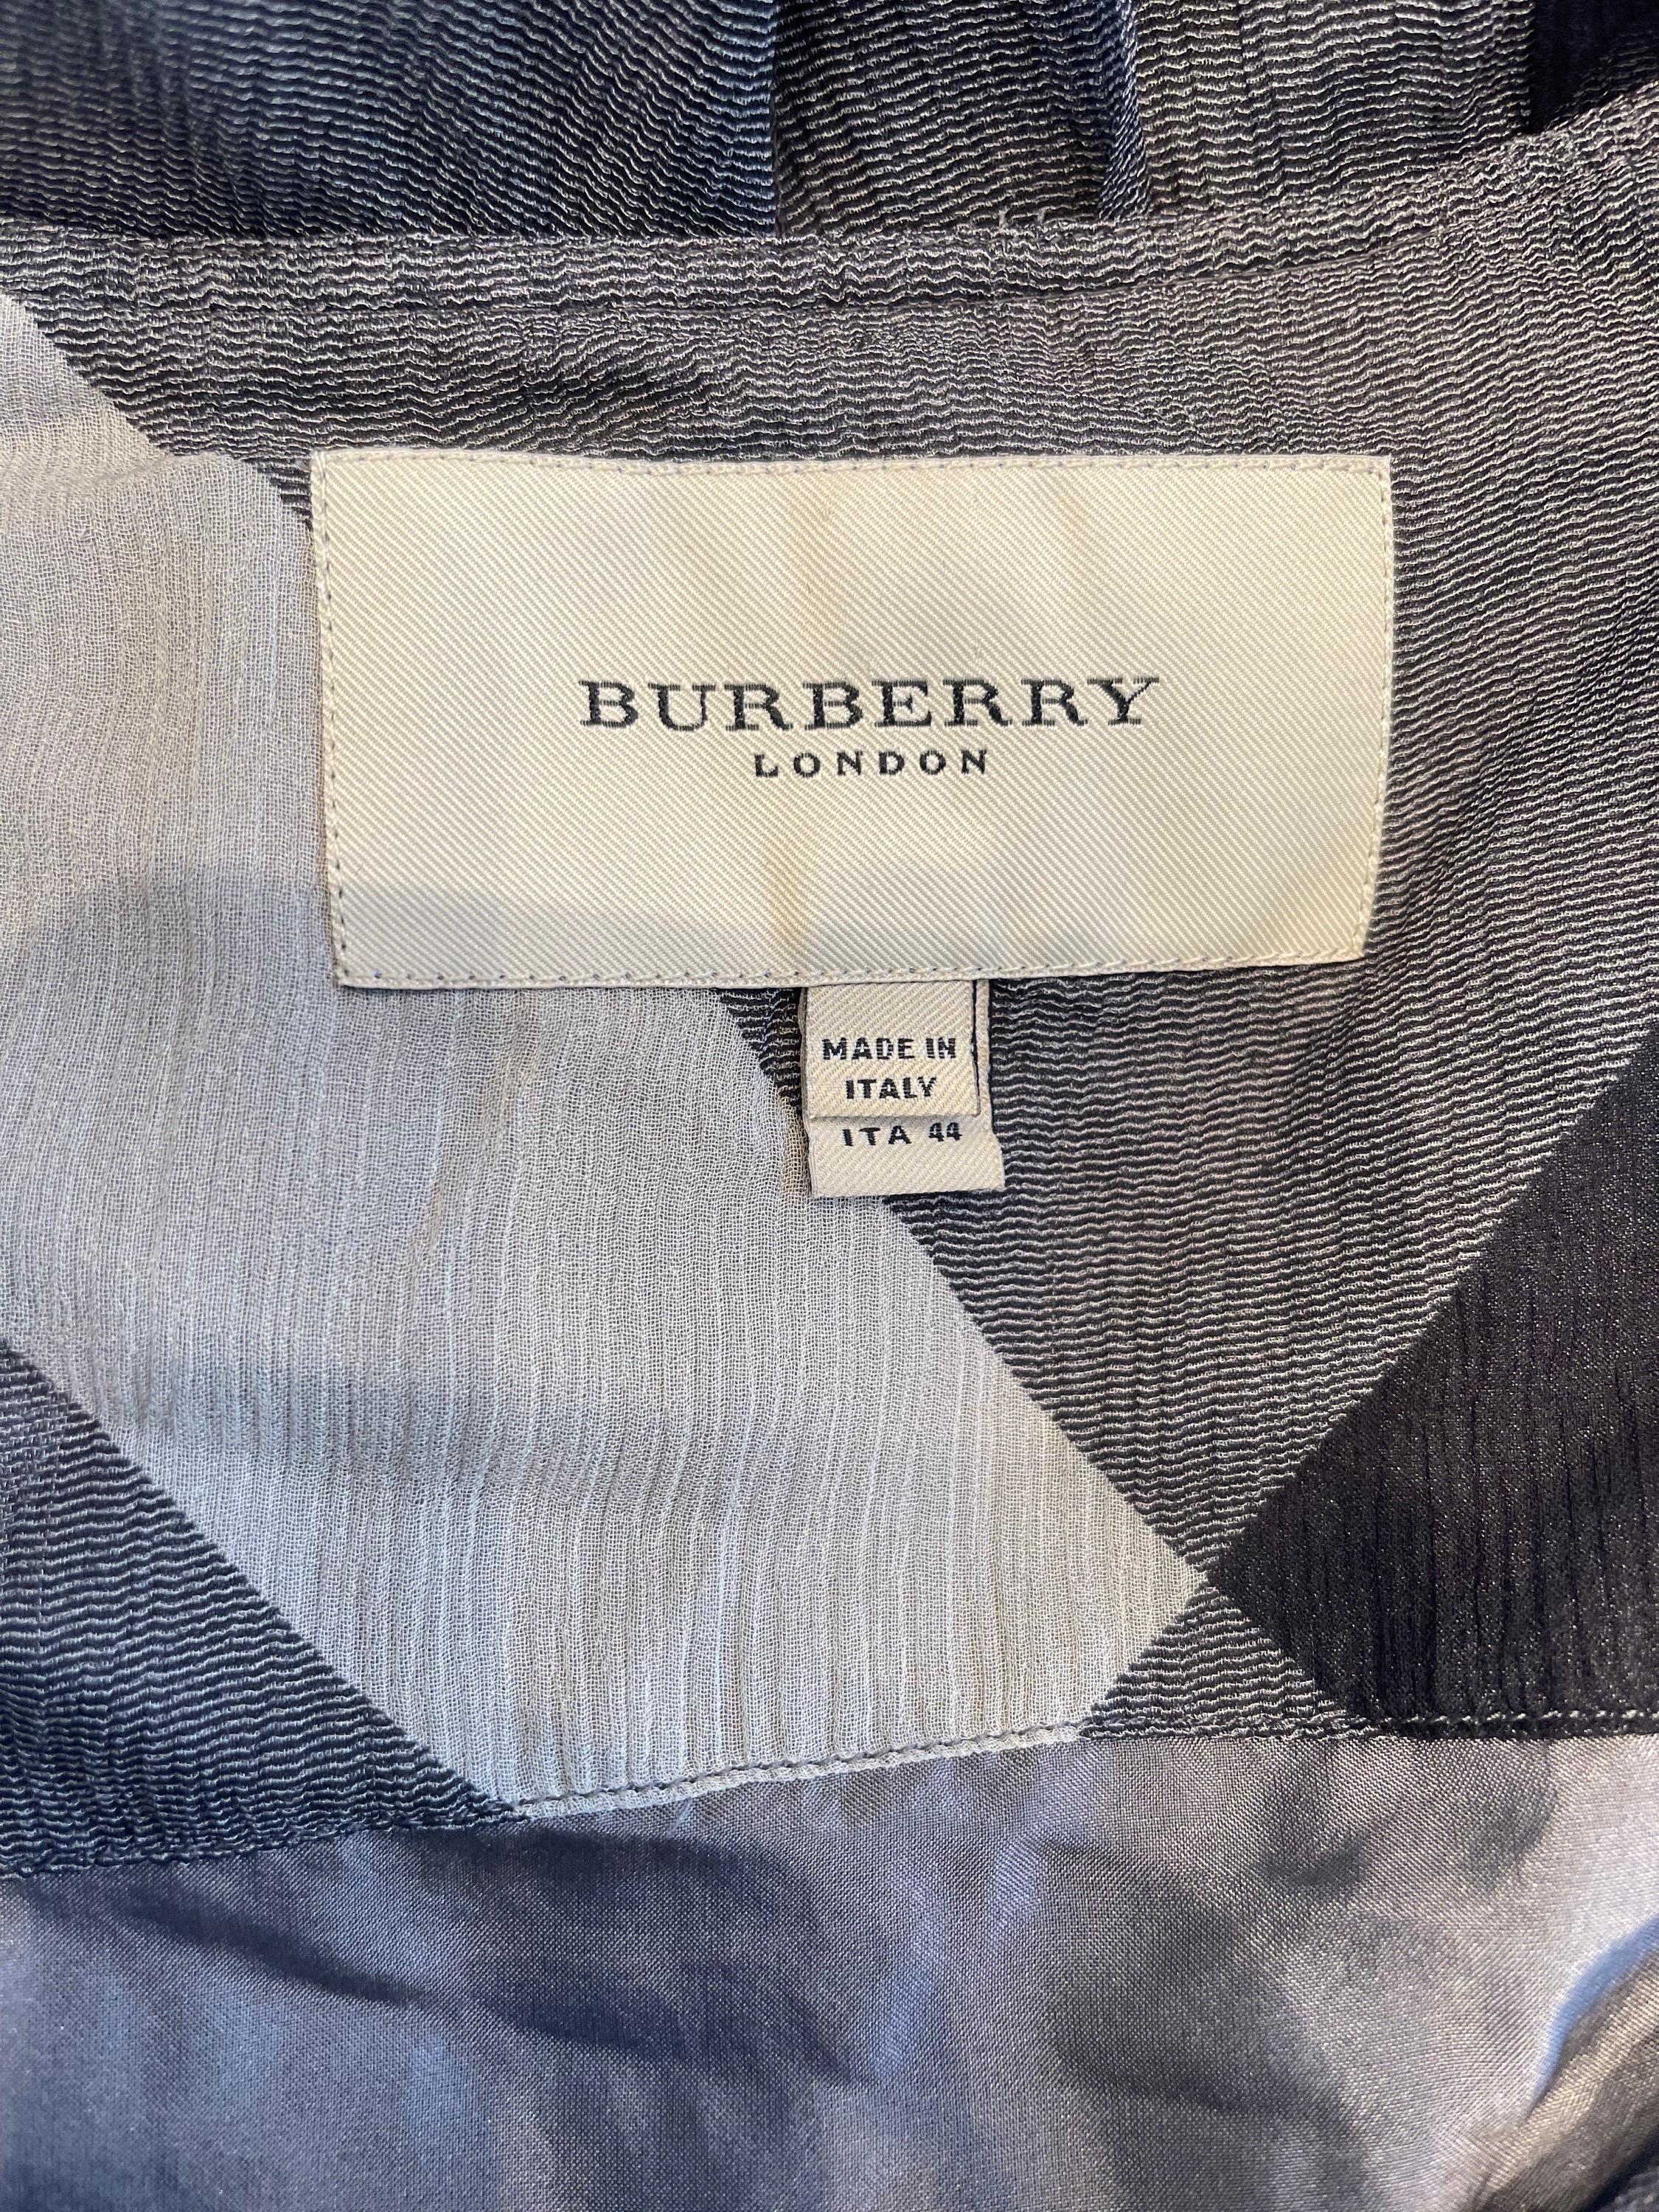 Chic Fall 2001 BURBERRY grey, black and ivory signature plaid silk chiffon dress ! Features the brand’s signature checkered oversized plaid print. Detachable black patent leather belt. Forfeit the belt for a trapeze style dress. The perfect